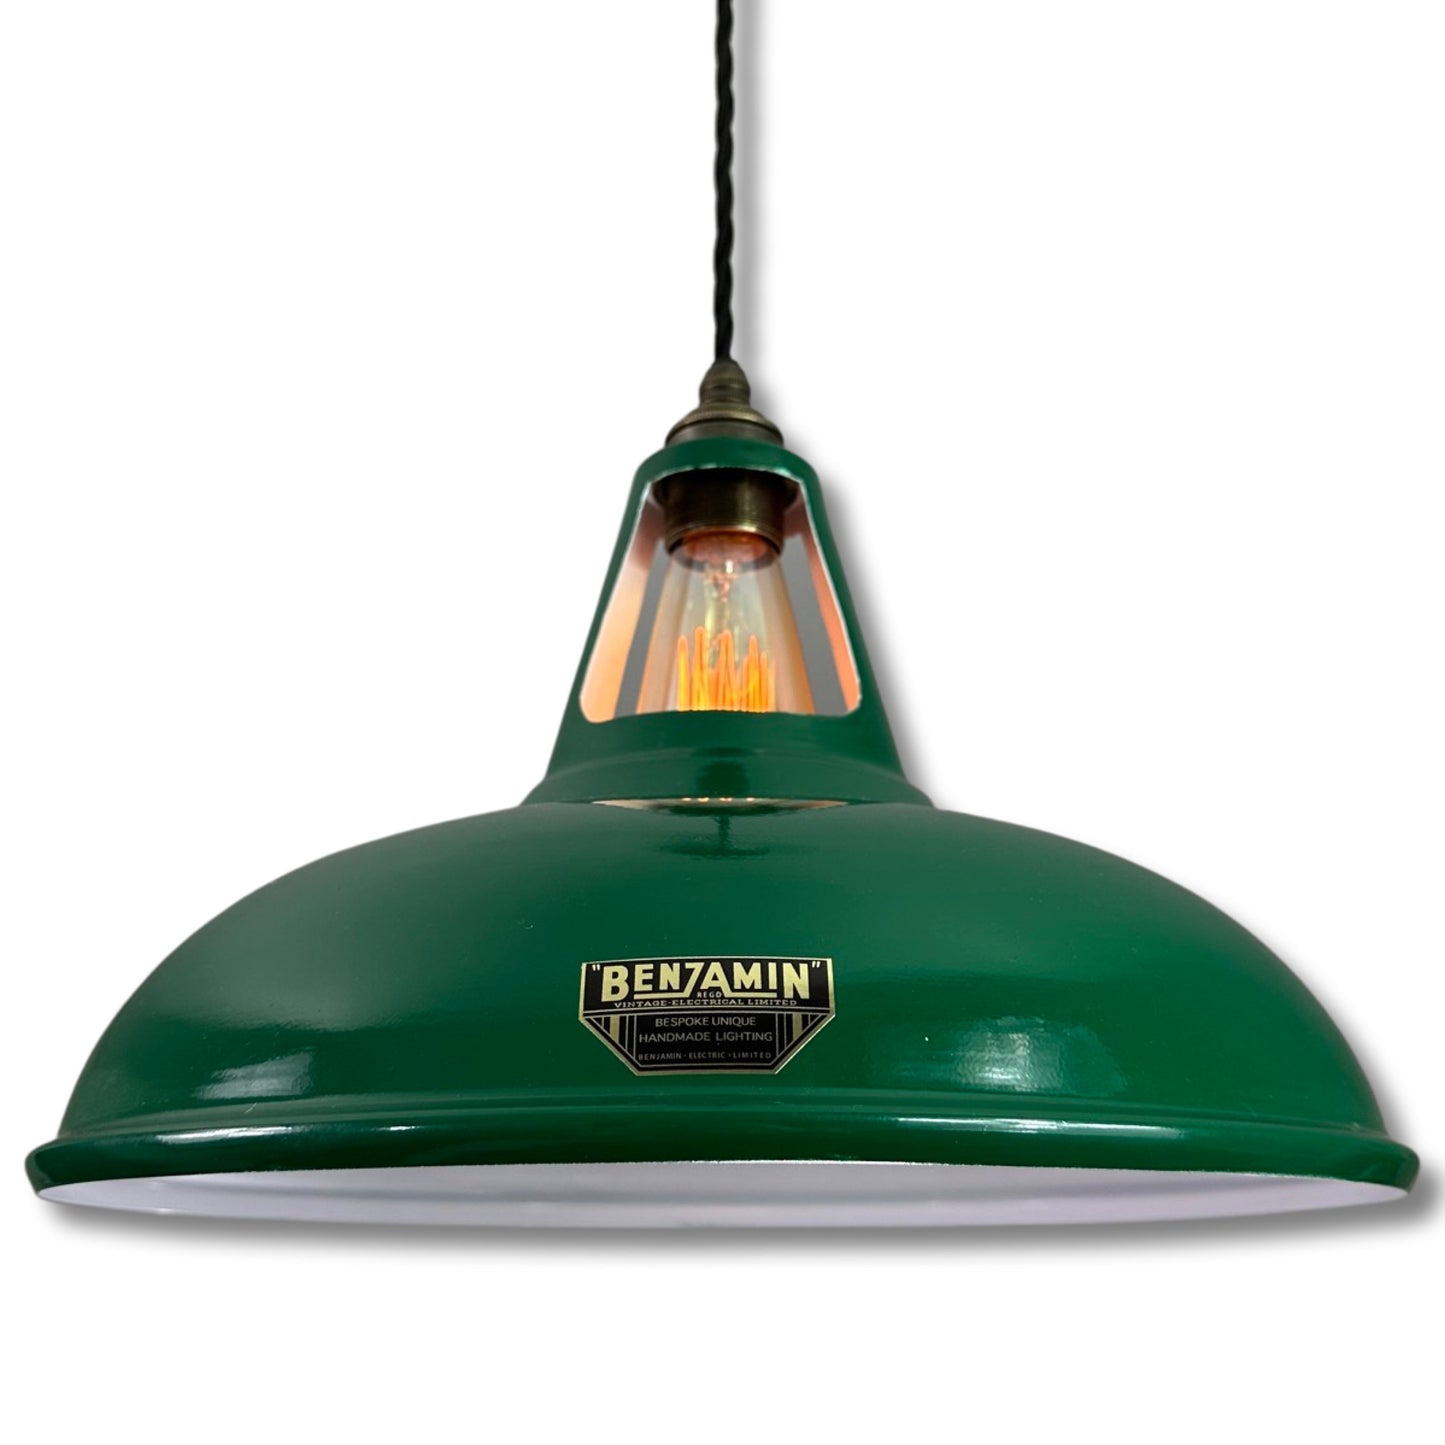 Cawston XL ~ Racing Green Solid Shade Slot Design Pendant Set Light | Ceiling Dining Room | Kitchen Table | Vintage Filament Bulb | 14 Inch